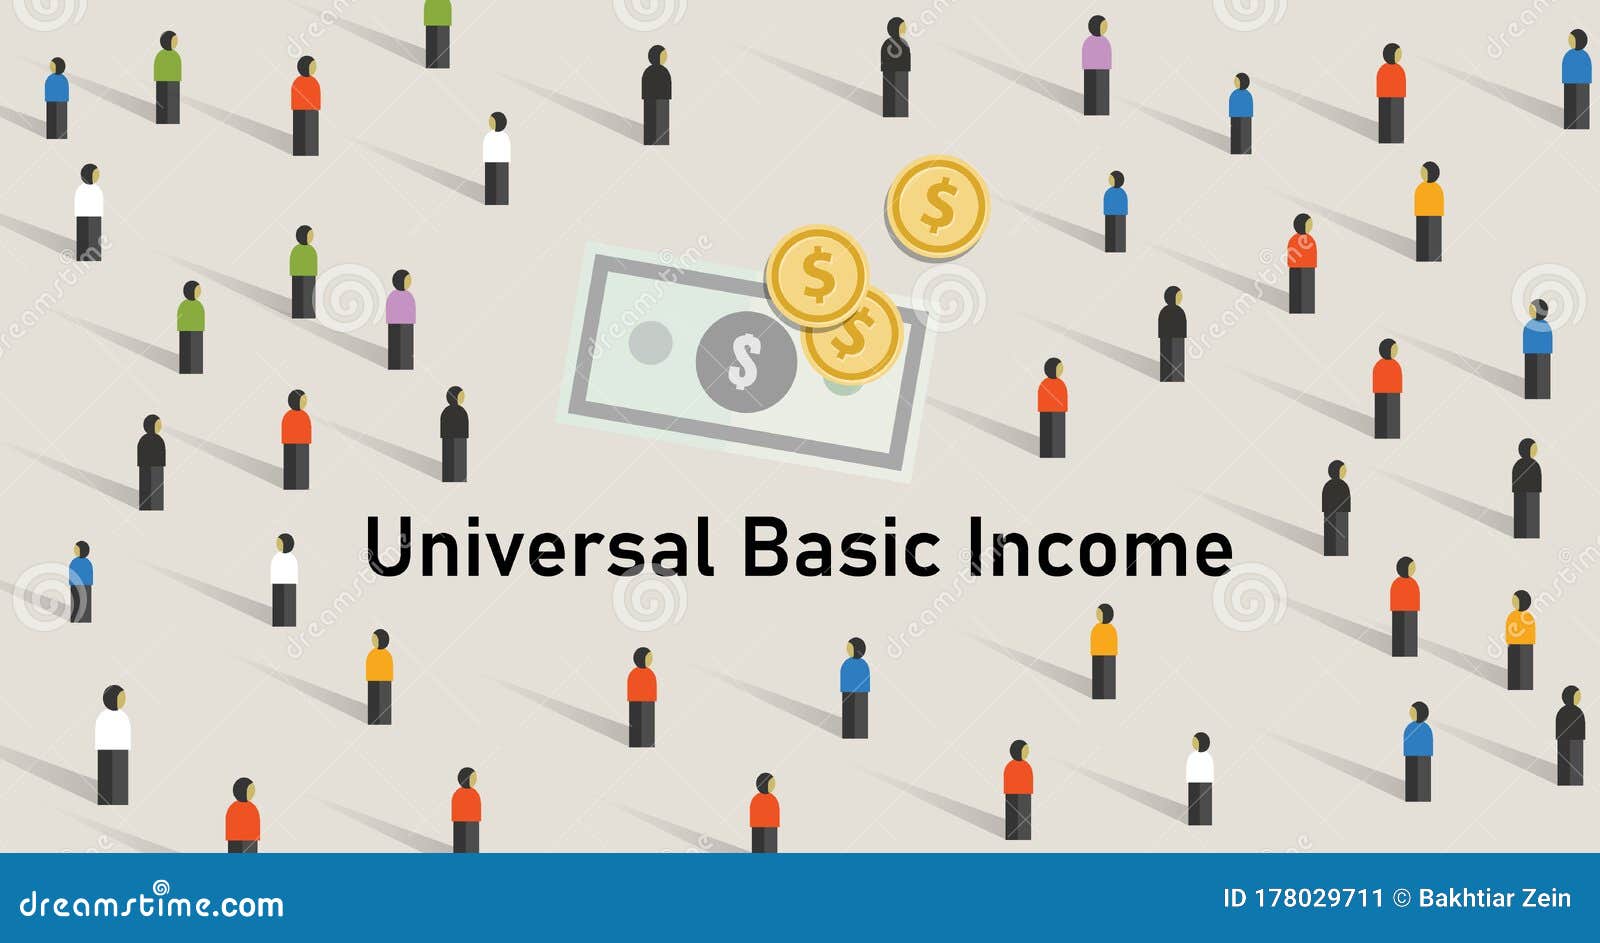 universal basic income ubi is government guarantee for citizen receives a guaranteed minimum income.